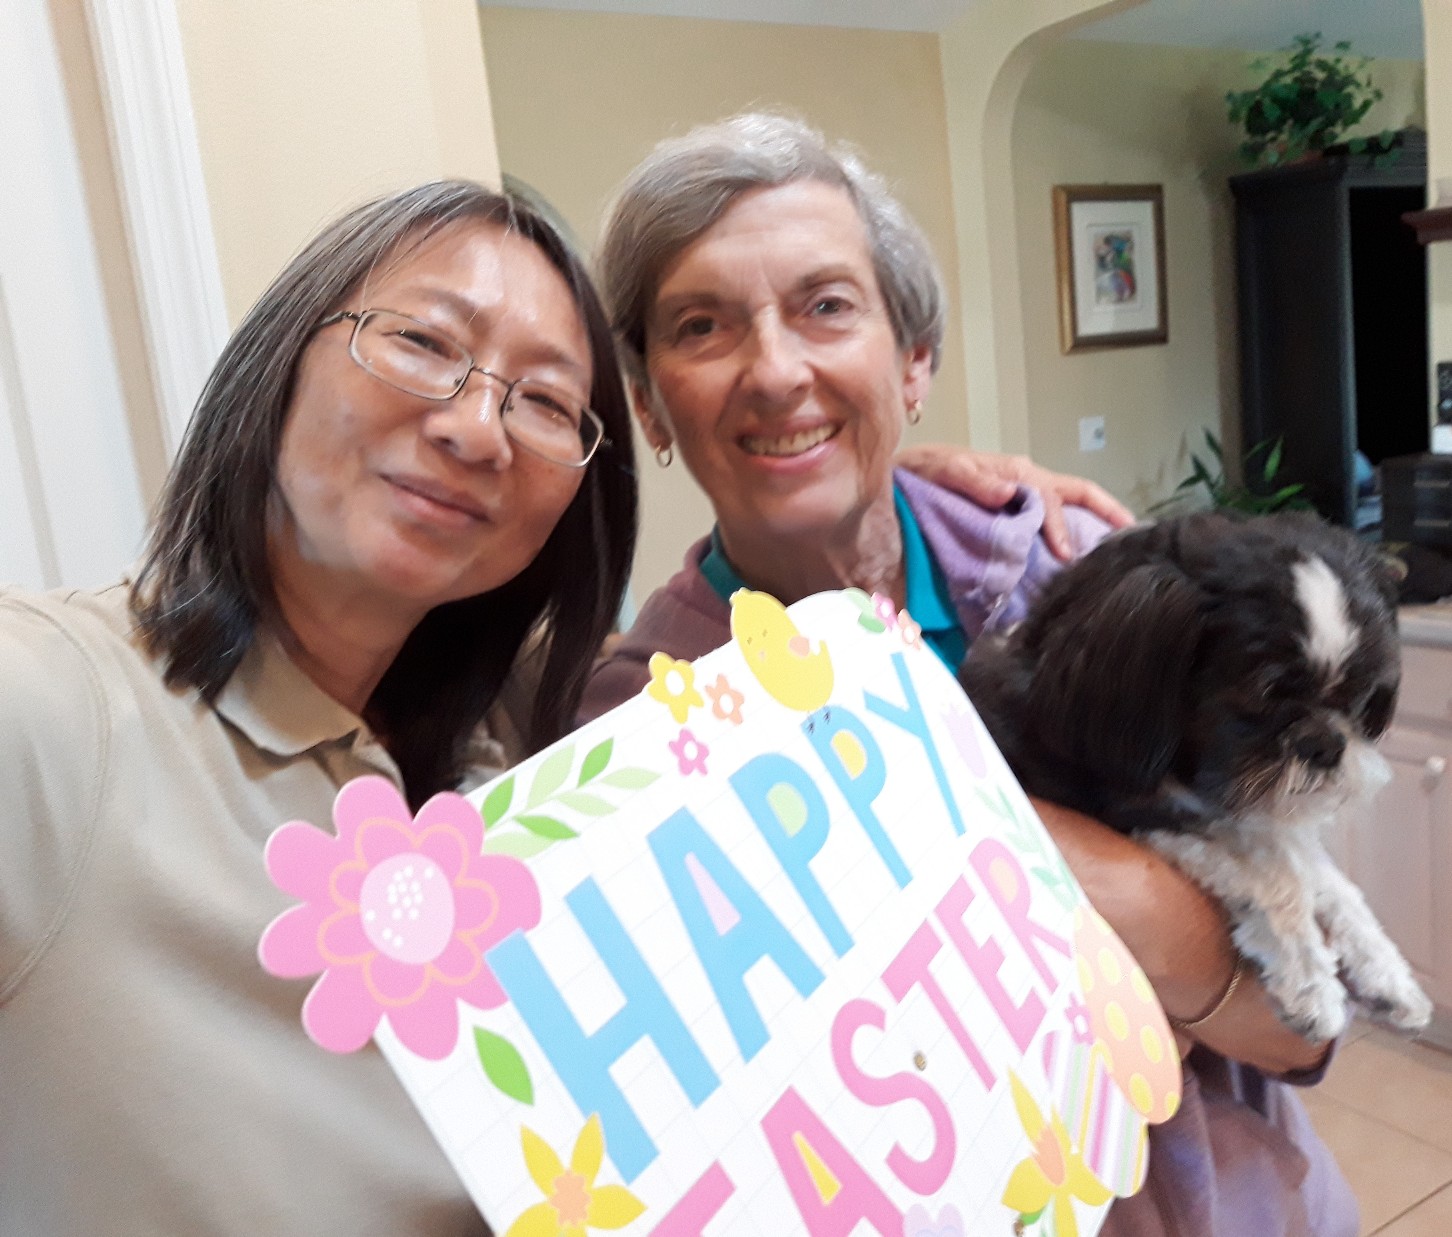 Happy Easter Mum. Pat and Stitches brought over a big Easter Basket with lots of chocolate. Now you can eat whatever you want. Love always. xoxo